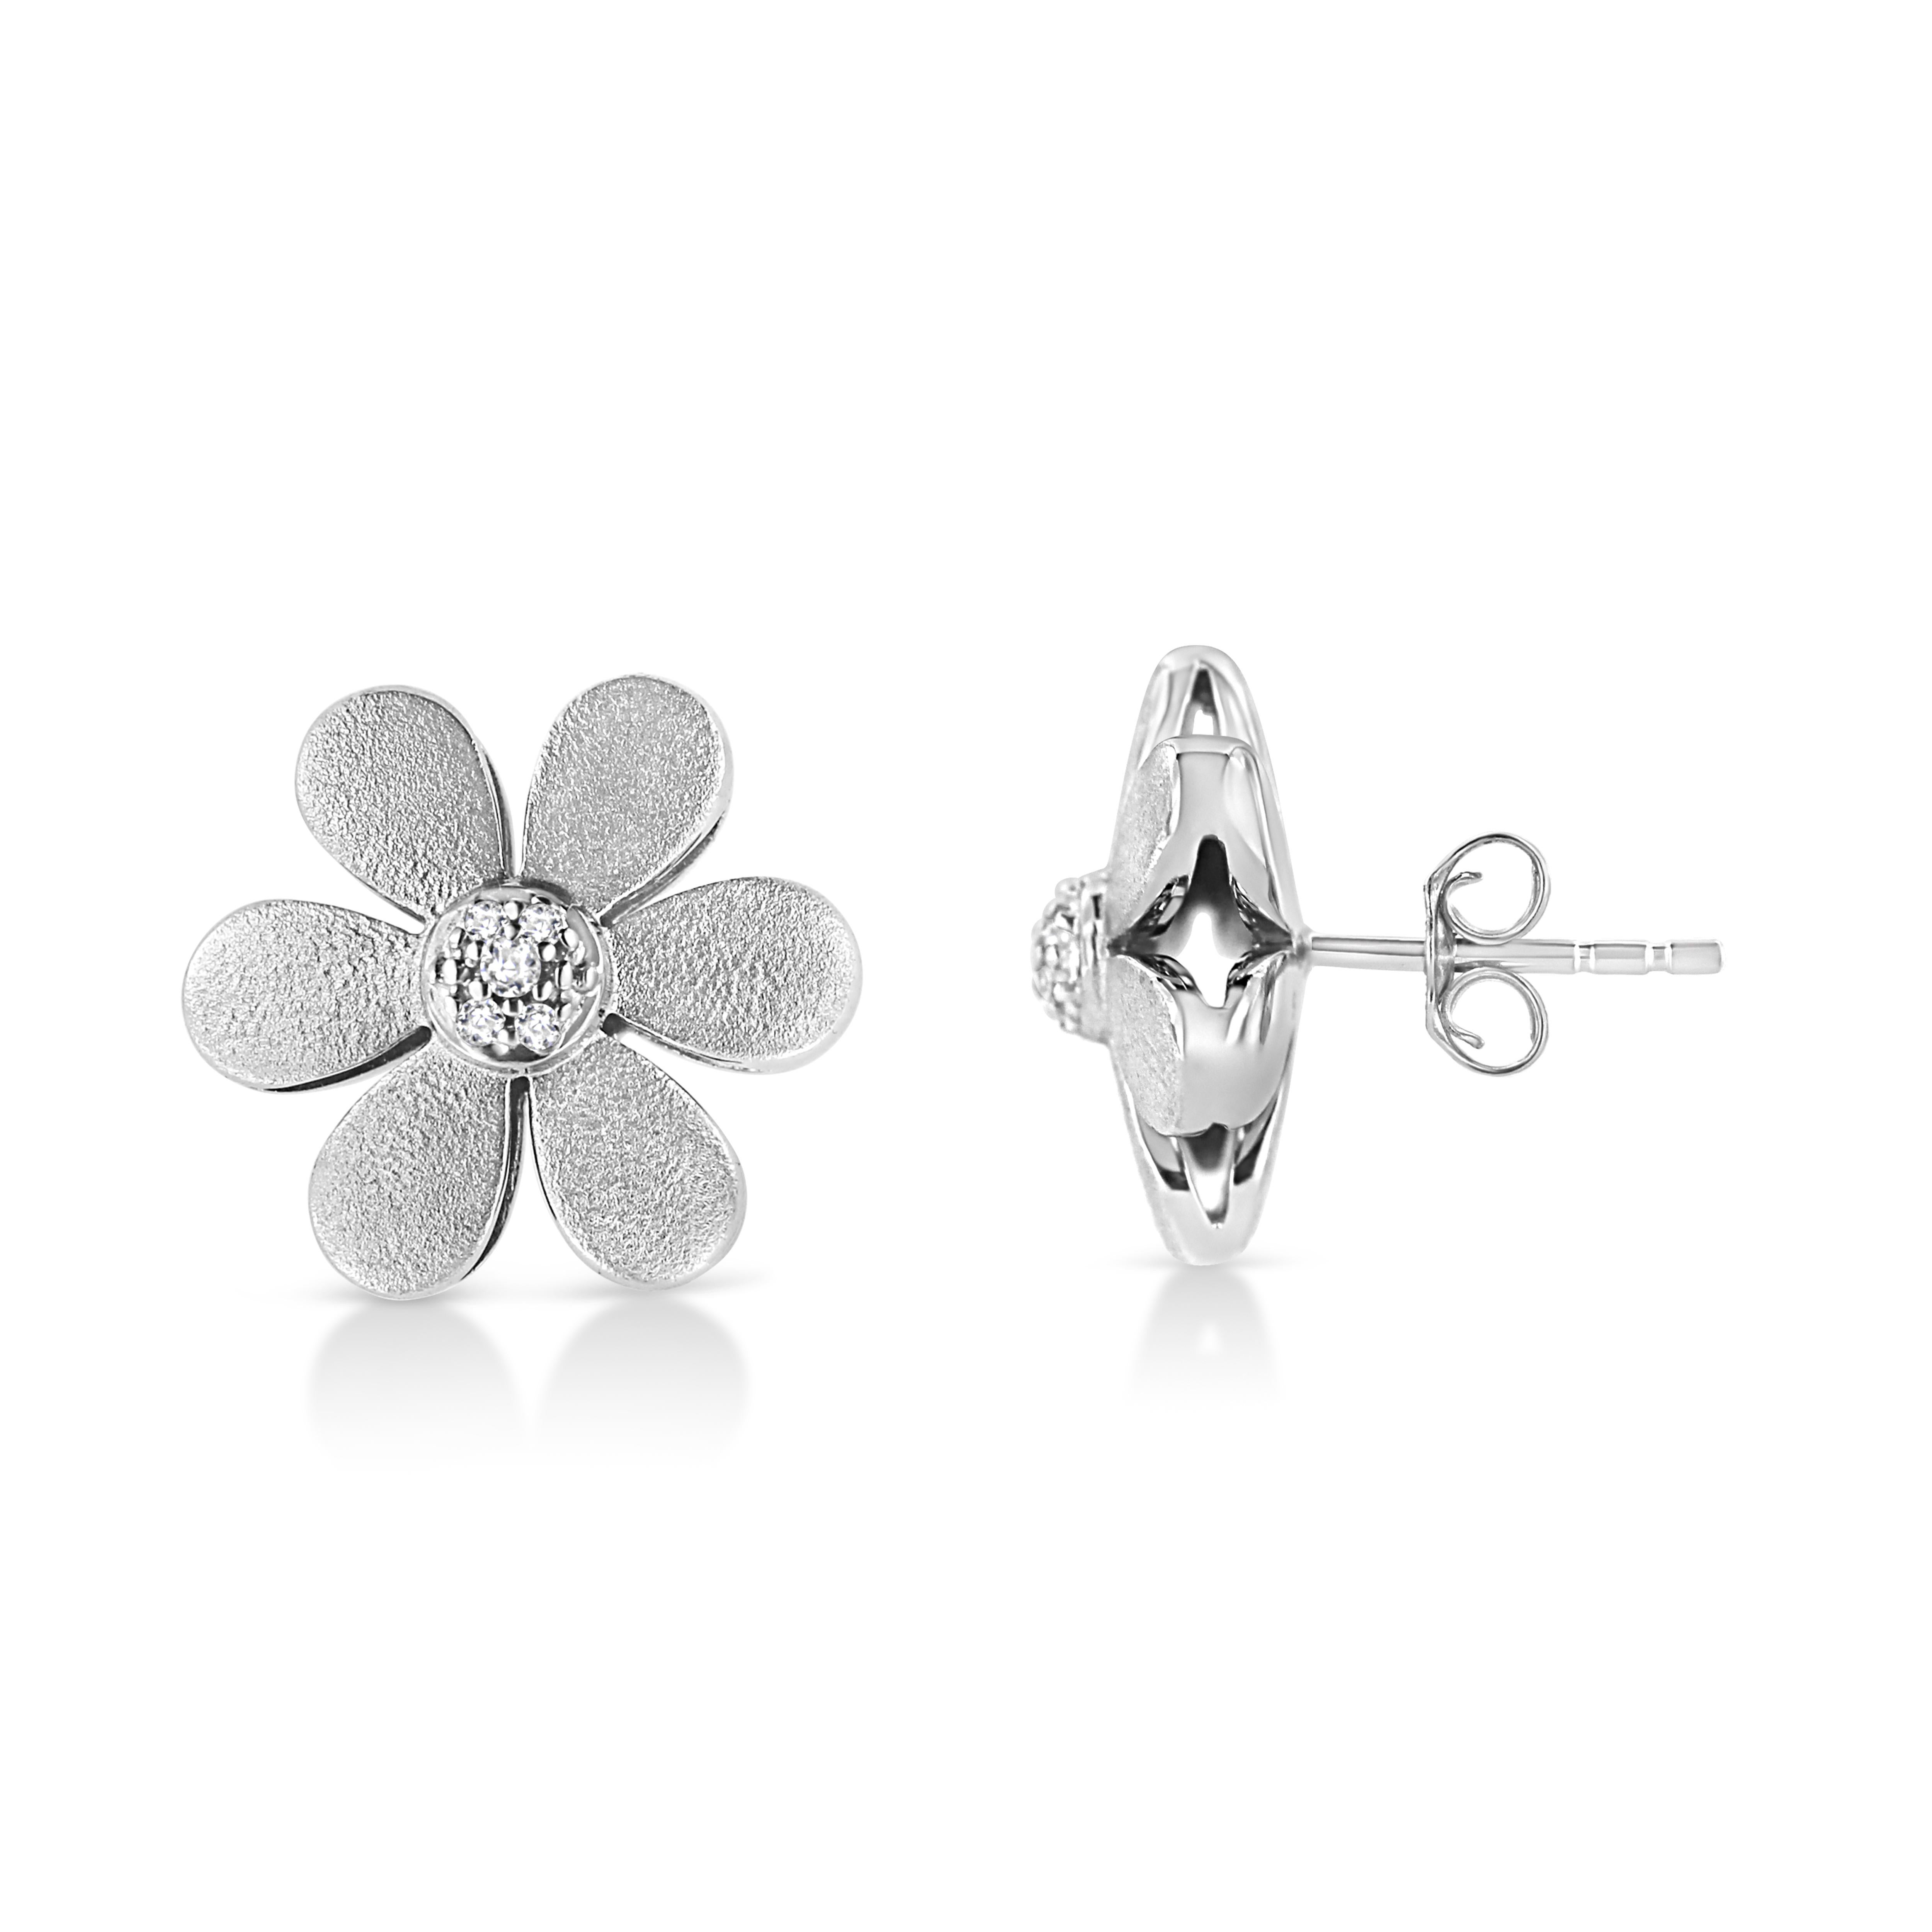 Celebrate your blooming love with these adorable diamond flower earrings made from .925 sterling silver and given a matte finish. Charming style for your sweetheart, these sterling silver floral earrings are embellished by a cluster of 10 pave set